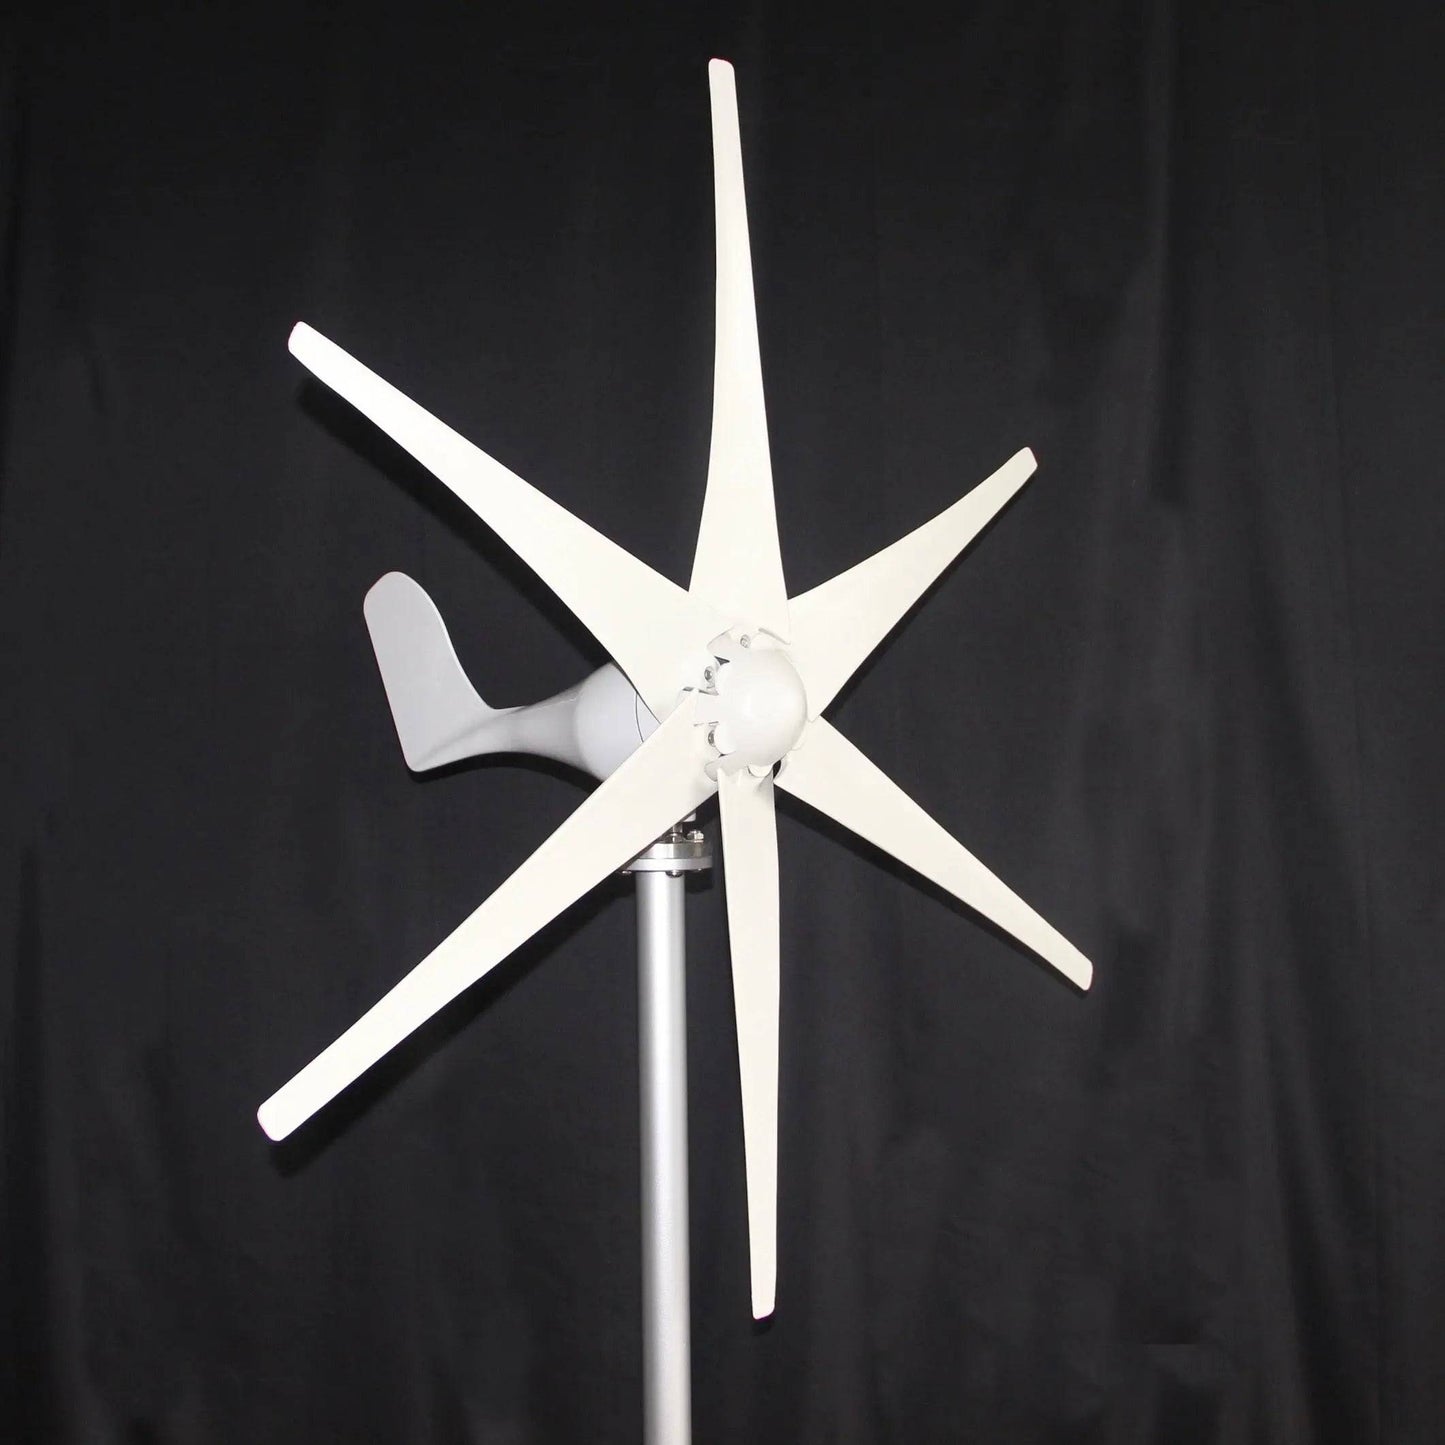 Wind Turbine Generator Fit Windmill 800 W With Wind Controller 12/24V - 54 Energy - Renewable Energy Store